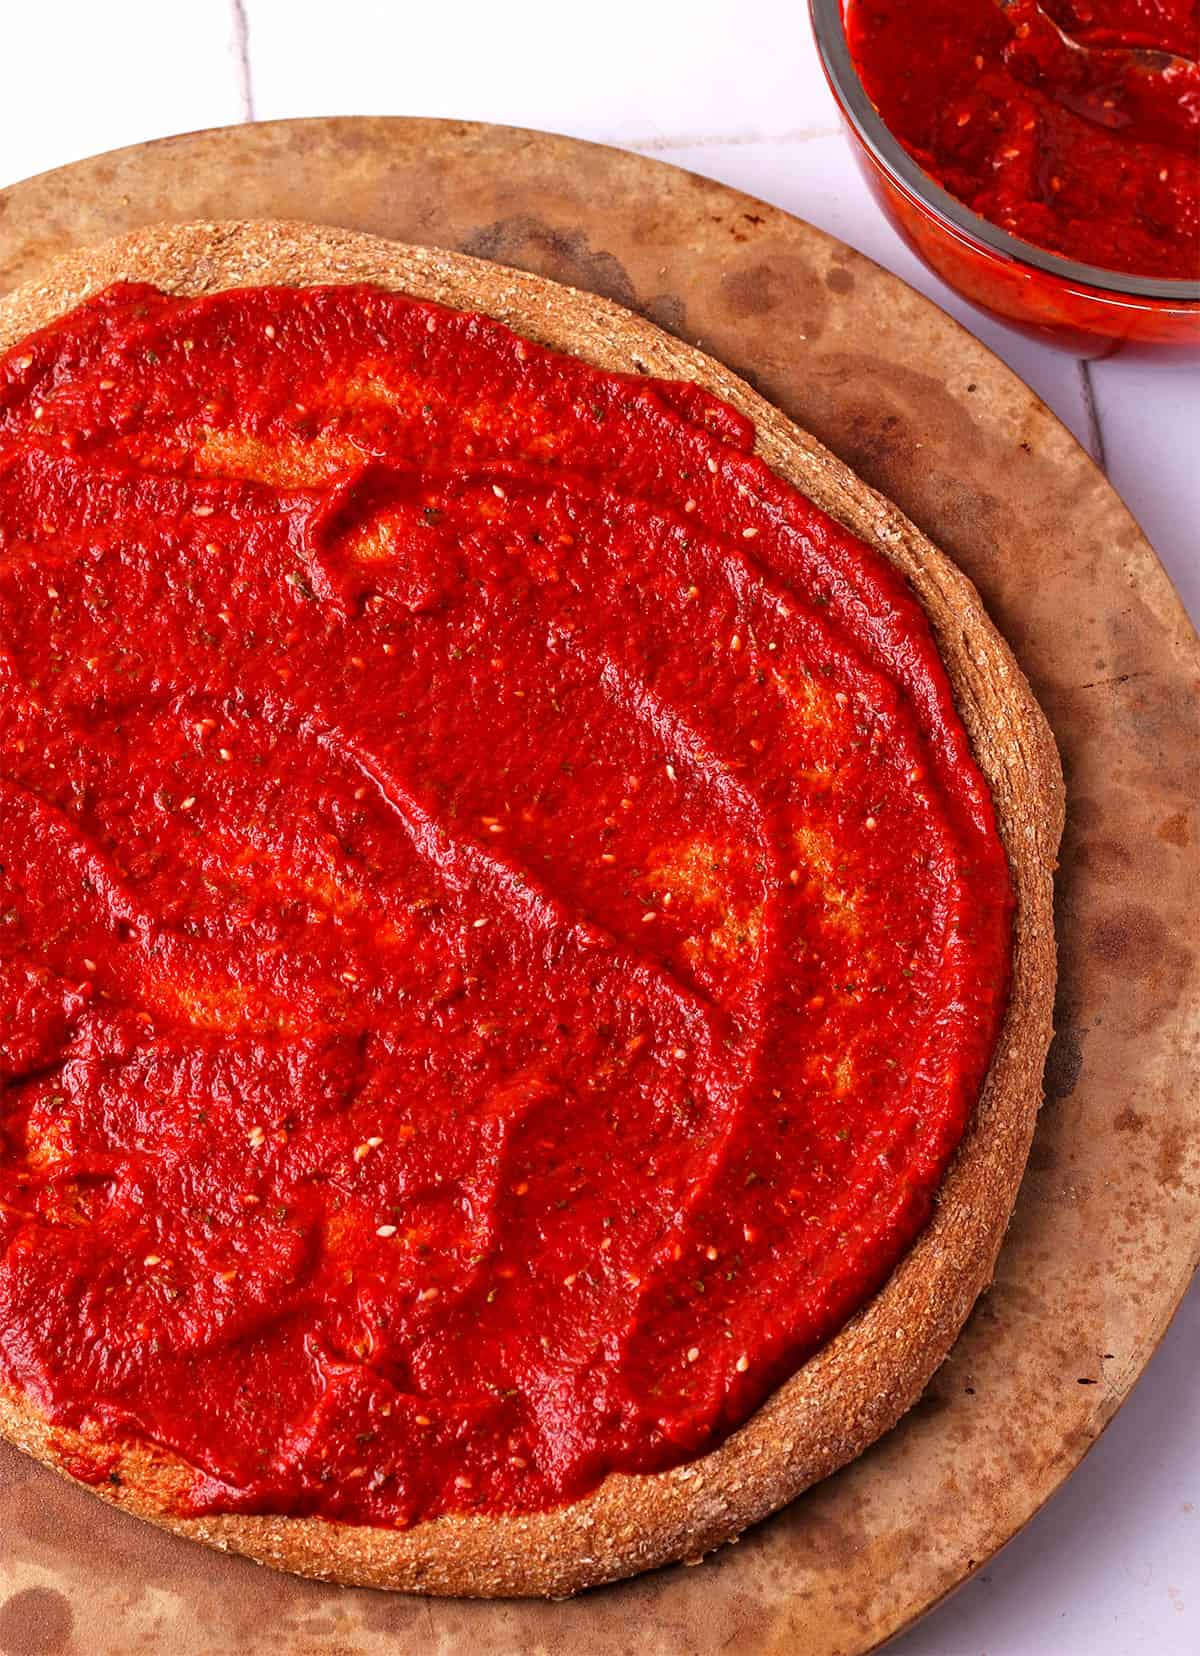 A pizza crust with vegan tomato pizza sauce.